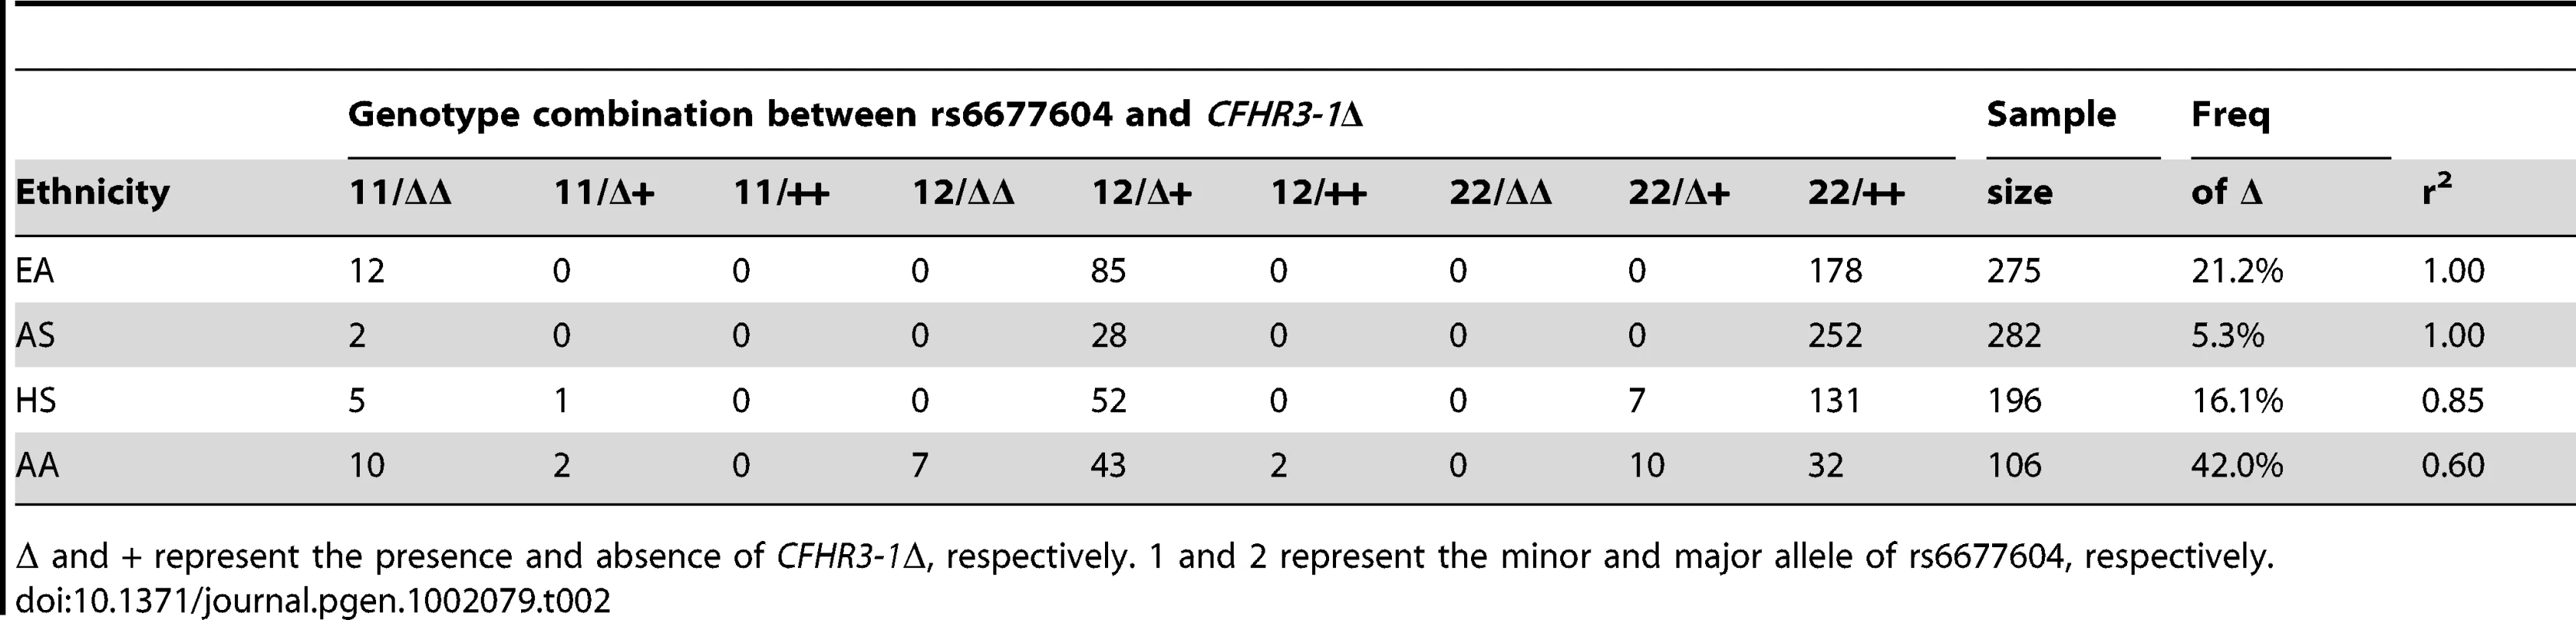 Pairwise LD between rs6677604 and <i>CFHR3-1</i>Δ in four ethnic groups.